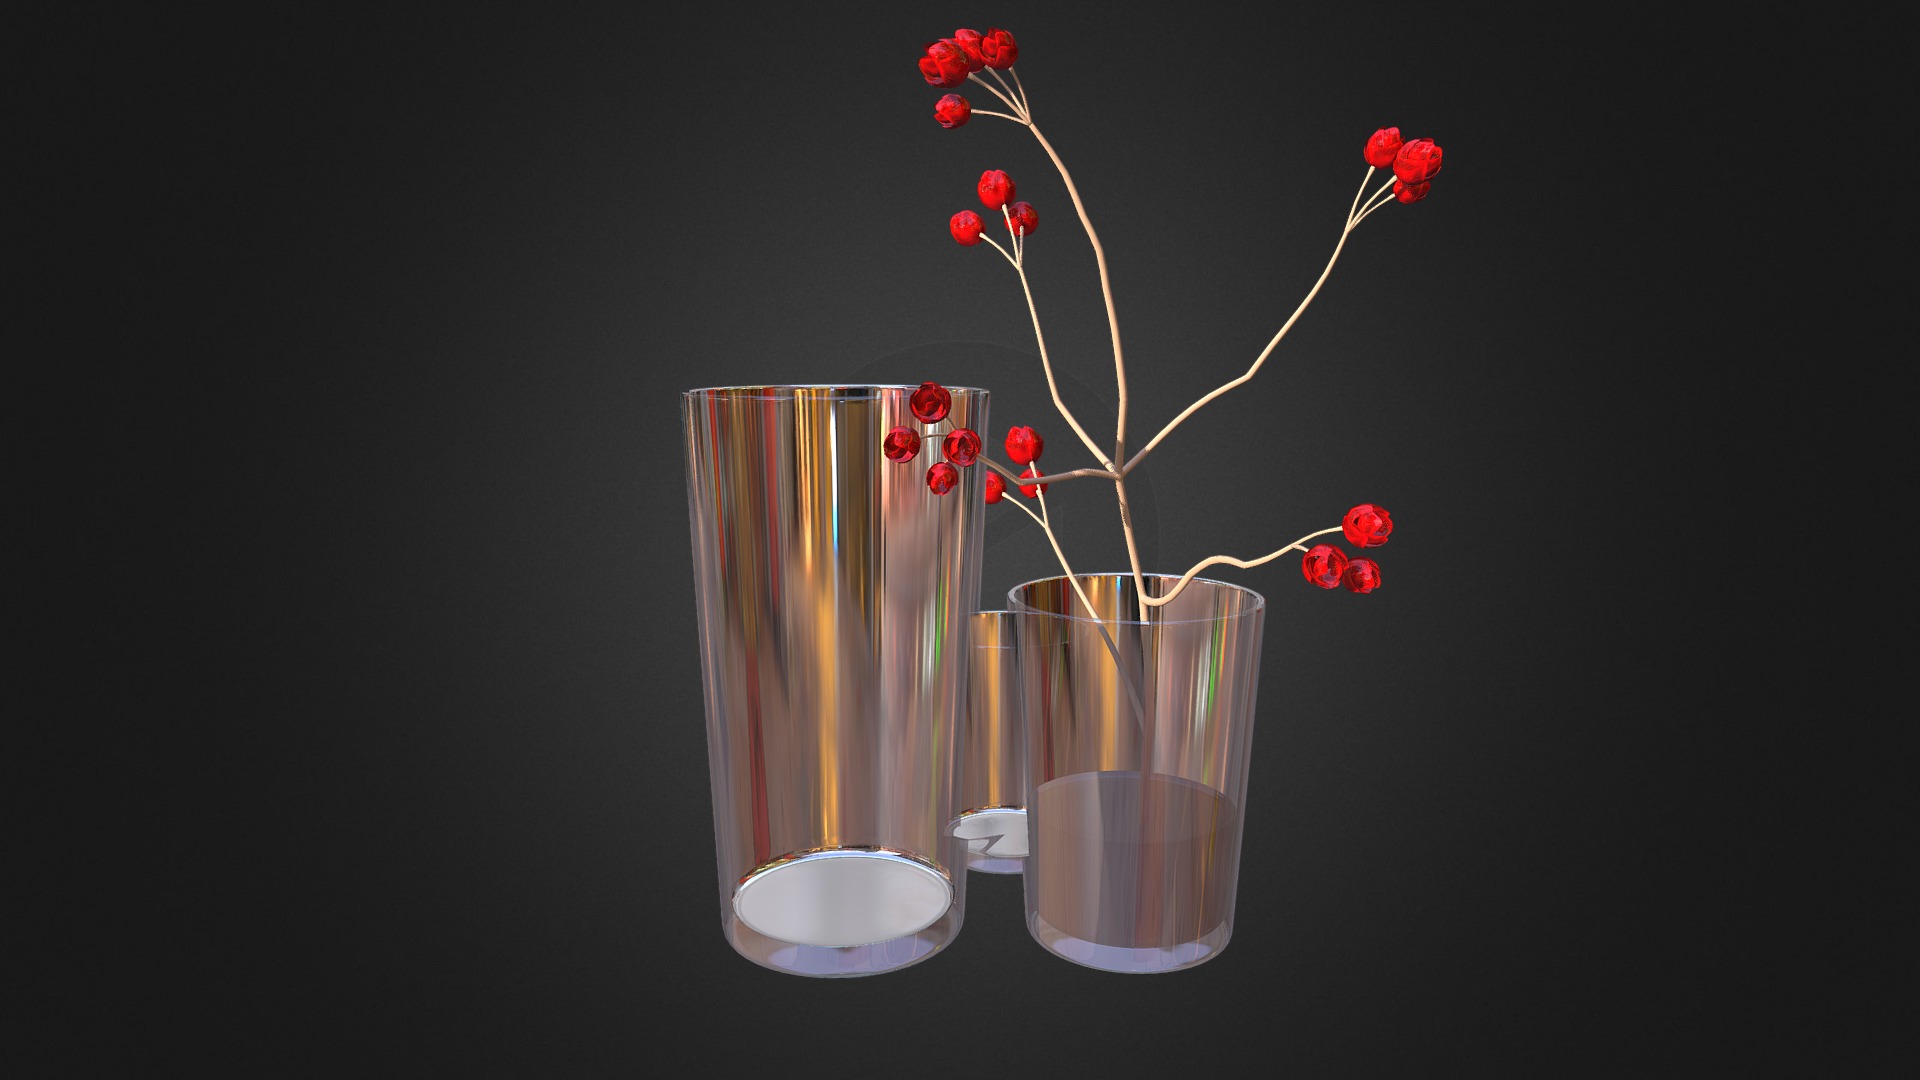 3D model Flower in Vases - This is a 3D model of the Flower in Vases. The 3D model is about a group of glass vases with red flowers.